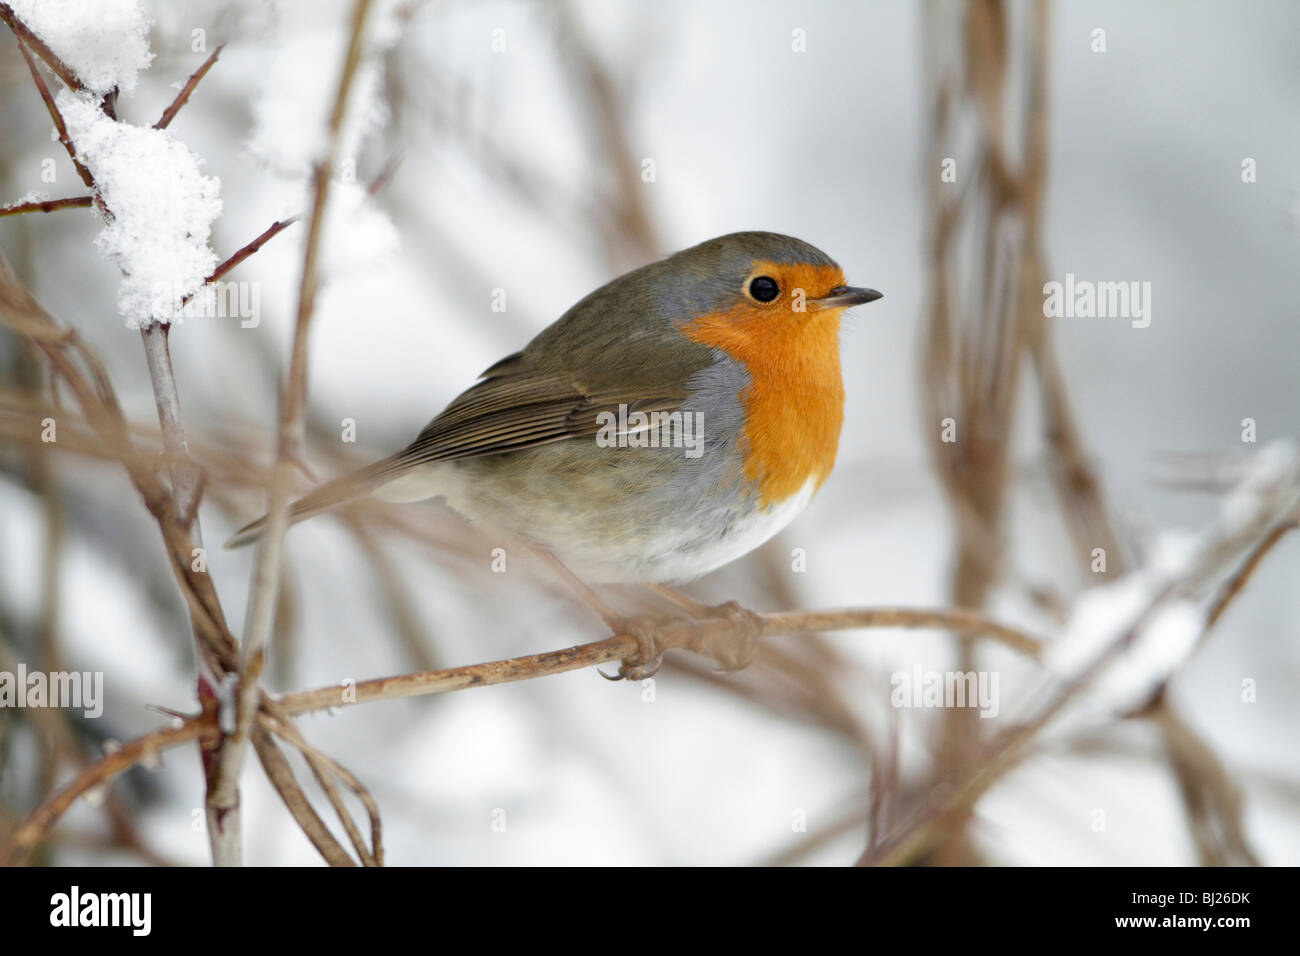 European Robin, Erithacus rubecula, perched on branch in garden, in winter, Germany Stock Photo